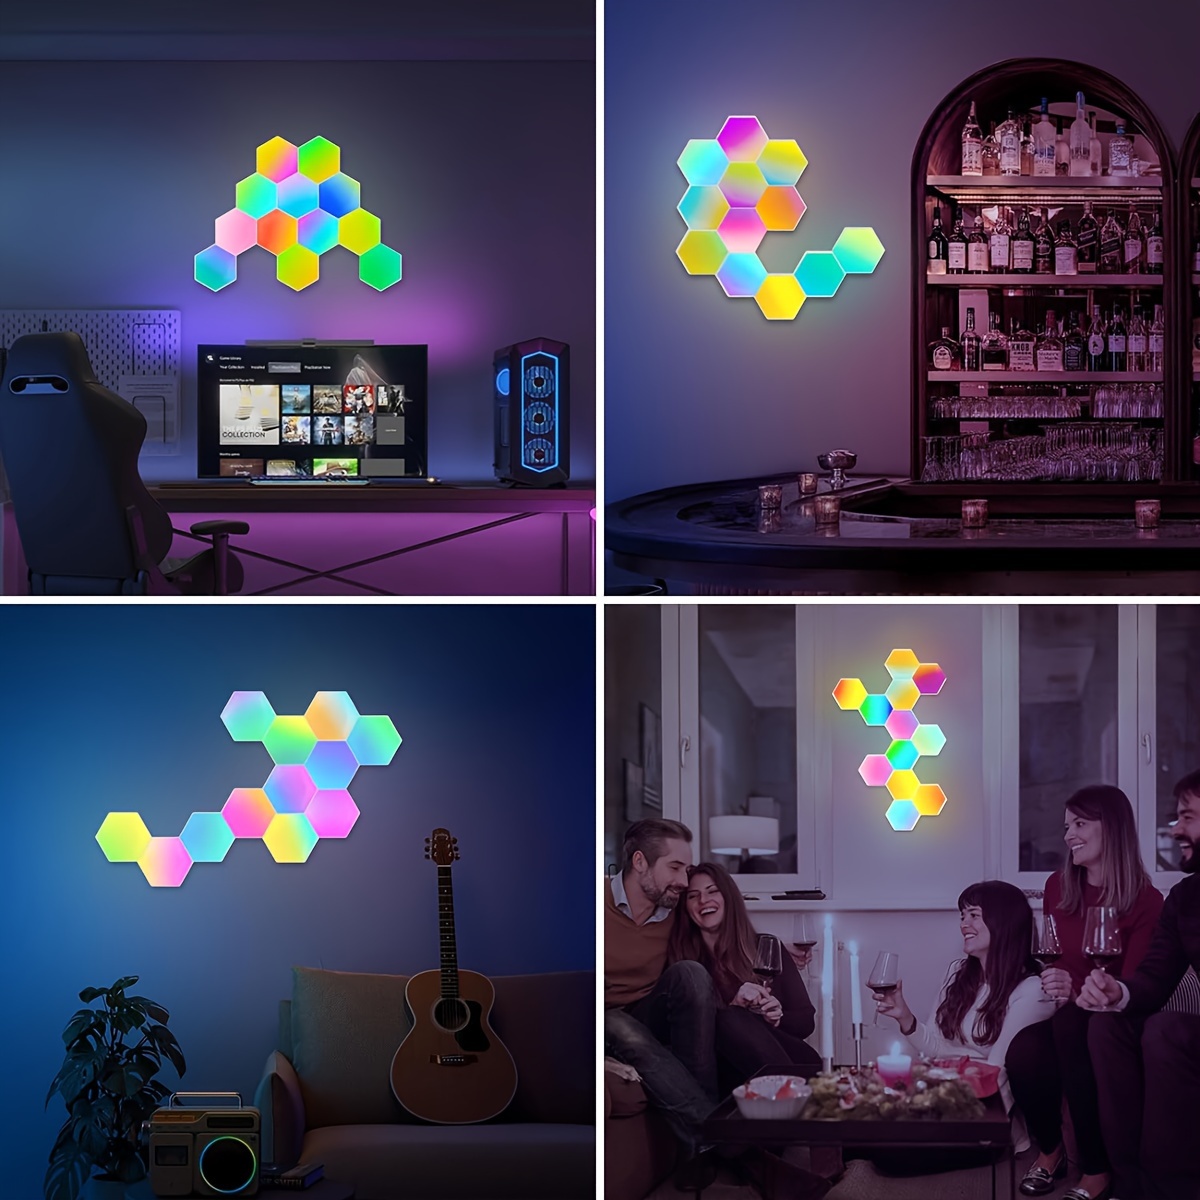 10 pack smart hexagon lights diy hexagon led light with app remote control music sync rgbic wall light panels for gaming room bedroom living room decor details 4